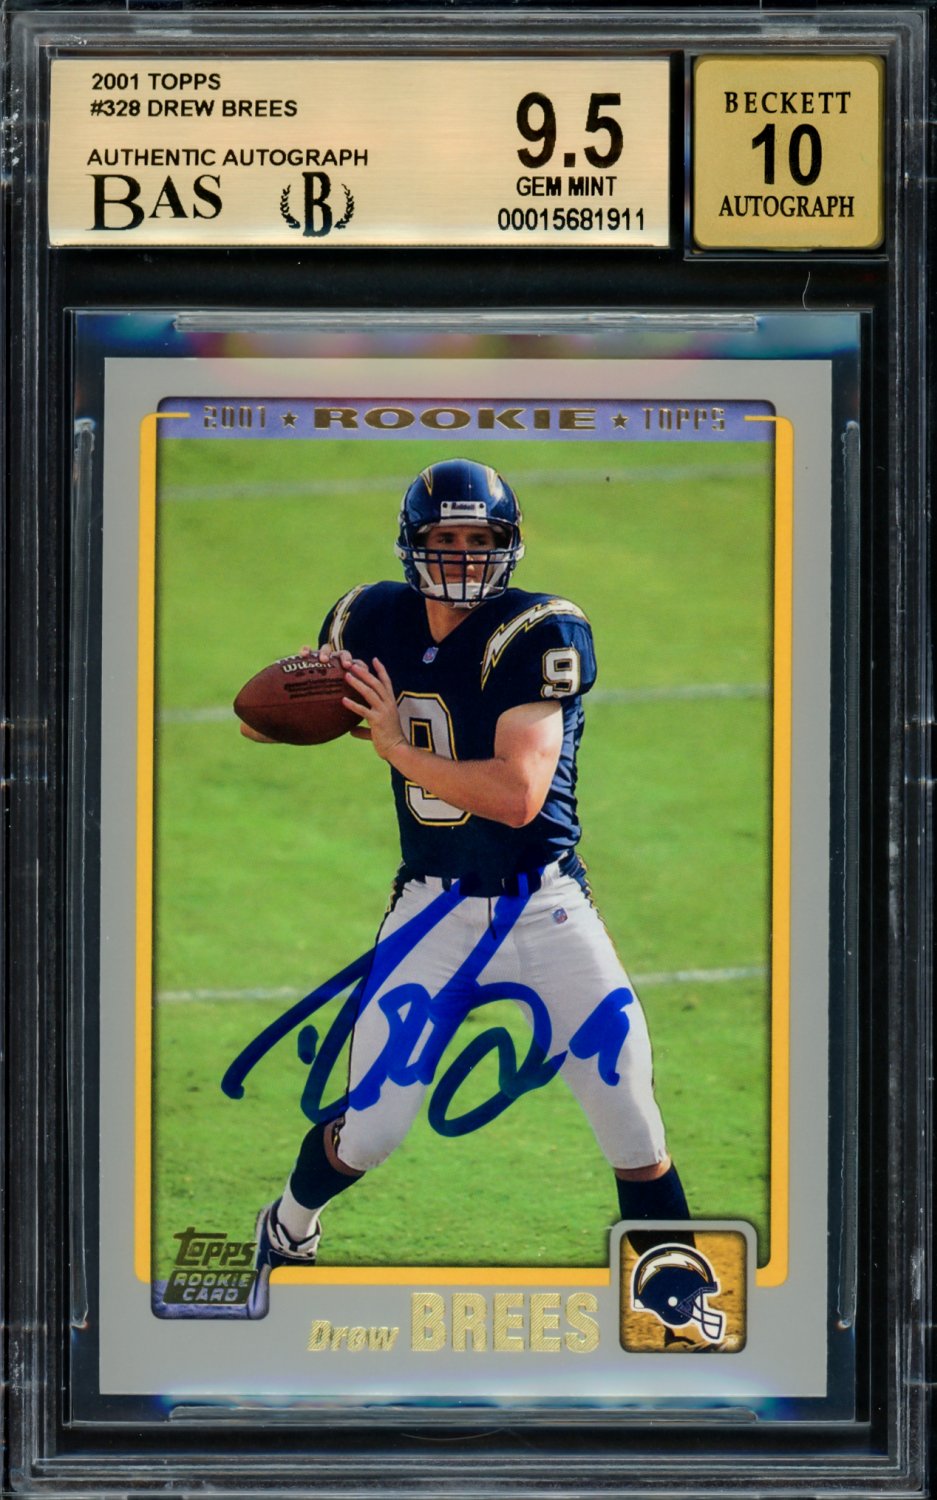 Drew Brees Autographed Signed 2001 Topps Rookie Card #328 San Diego Chargers  Bgs 9.5 Auto Grade Gem Mint 10 Highest Graded Beckett Beckett